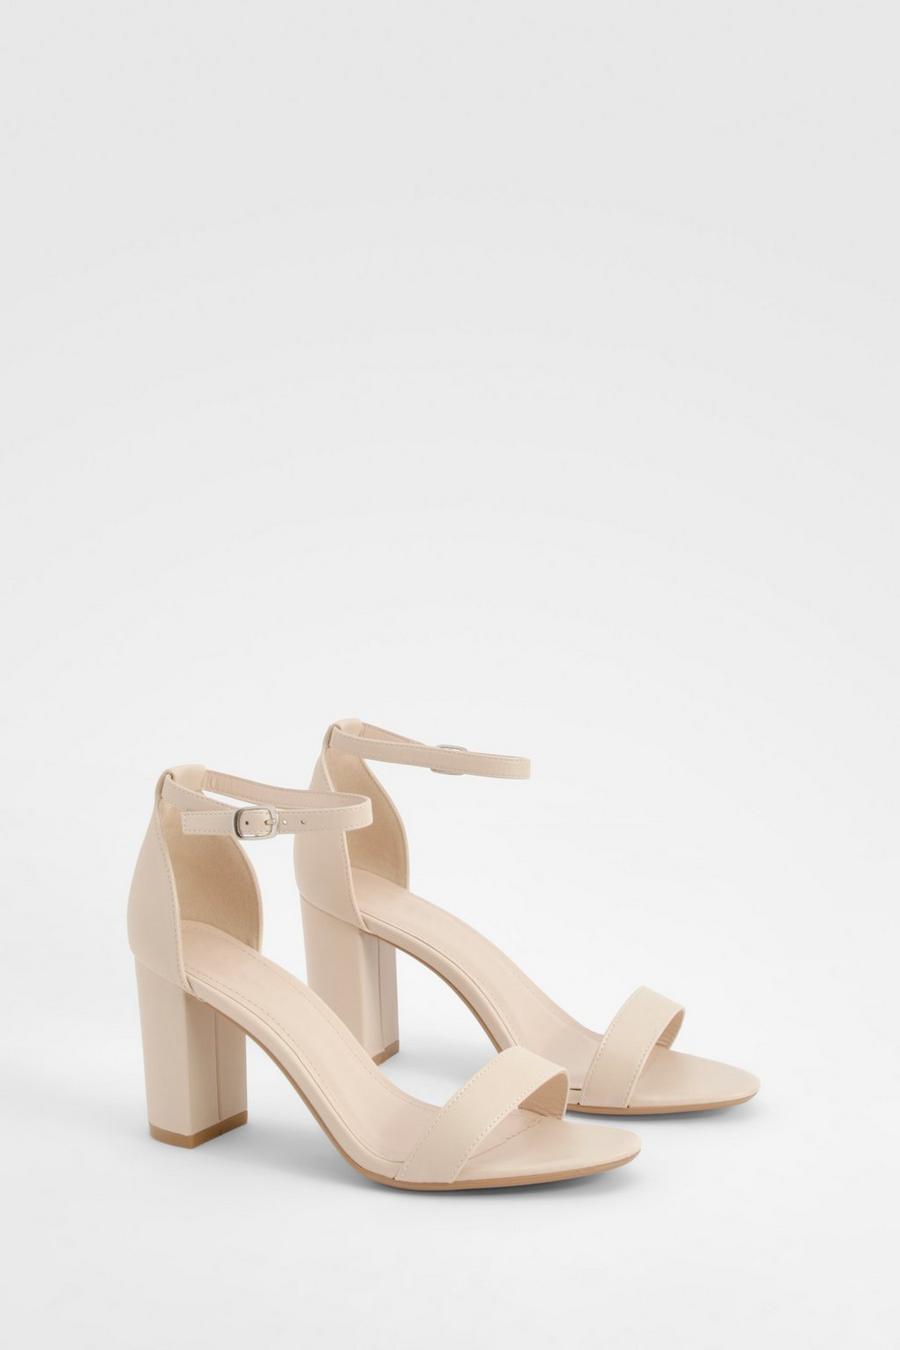 Beige Mid Block Barely There Heels